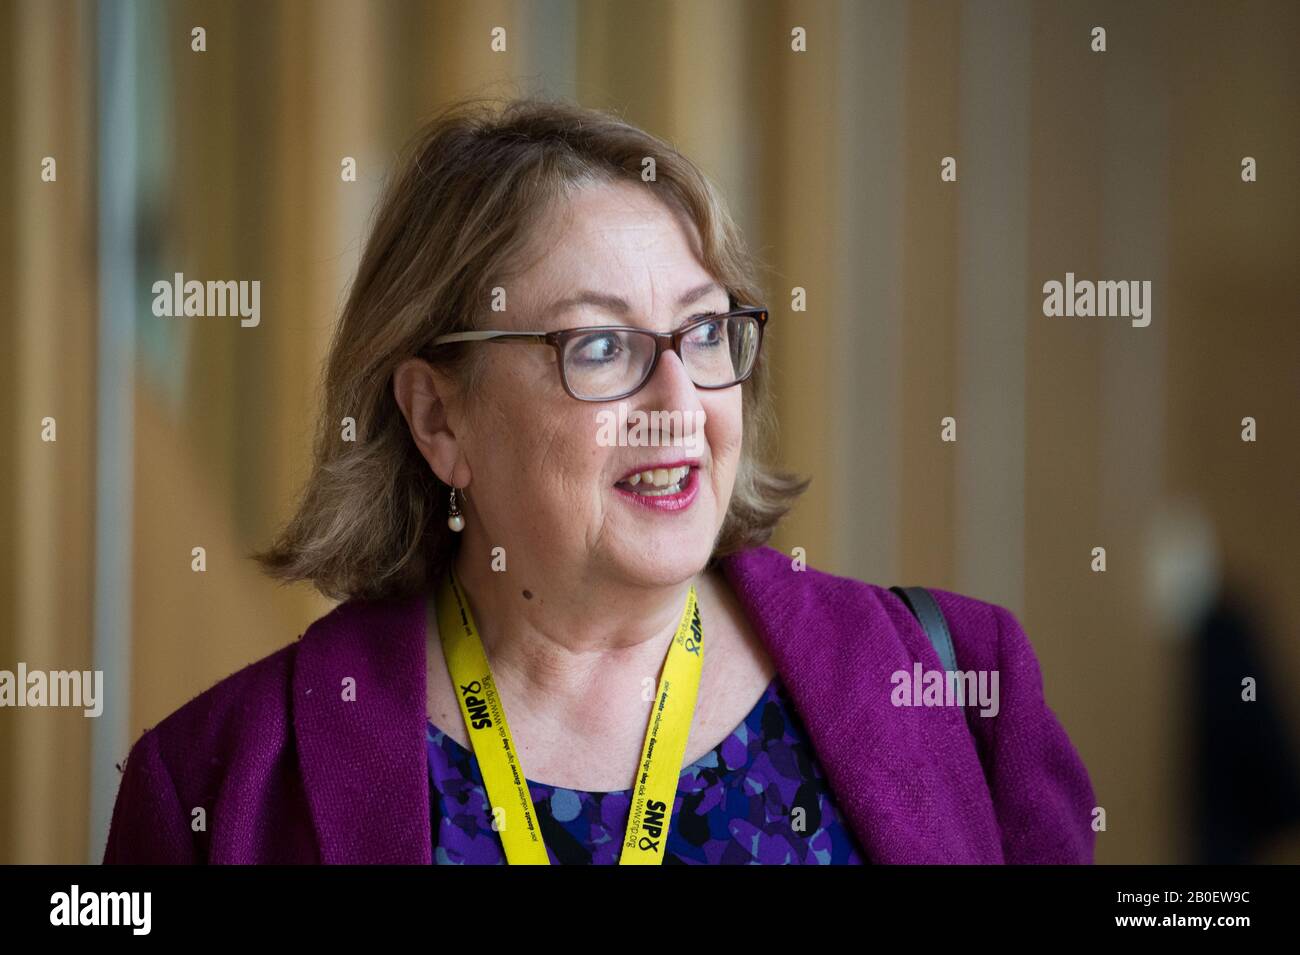 Edinburgh, UK. 20th Feb, 2020. Pictured: Annabelle Ewing MSP - Scottish National Party MSP for Cowdenbeath. Scenes from First Ministers Questions at the Scottish Parliament in Holyrood, Edinburgh. Credit: Colin Fisher/Alamy Live News Stock Photo